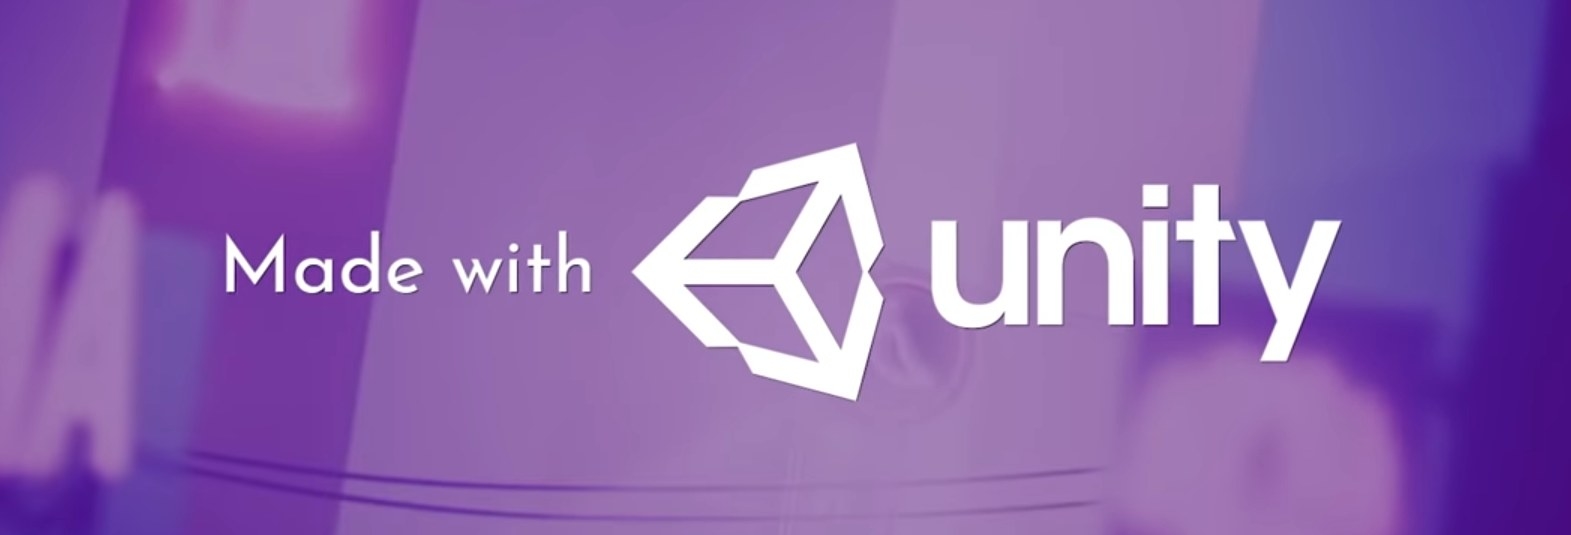 &quot;Made with unity,&quot; featuring the Unity logo